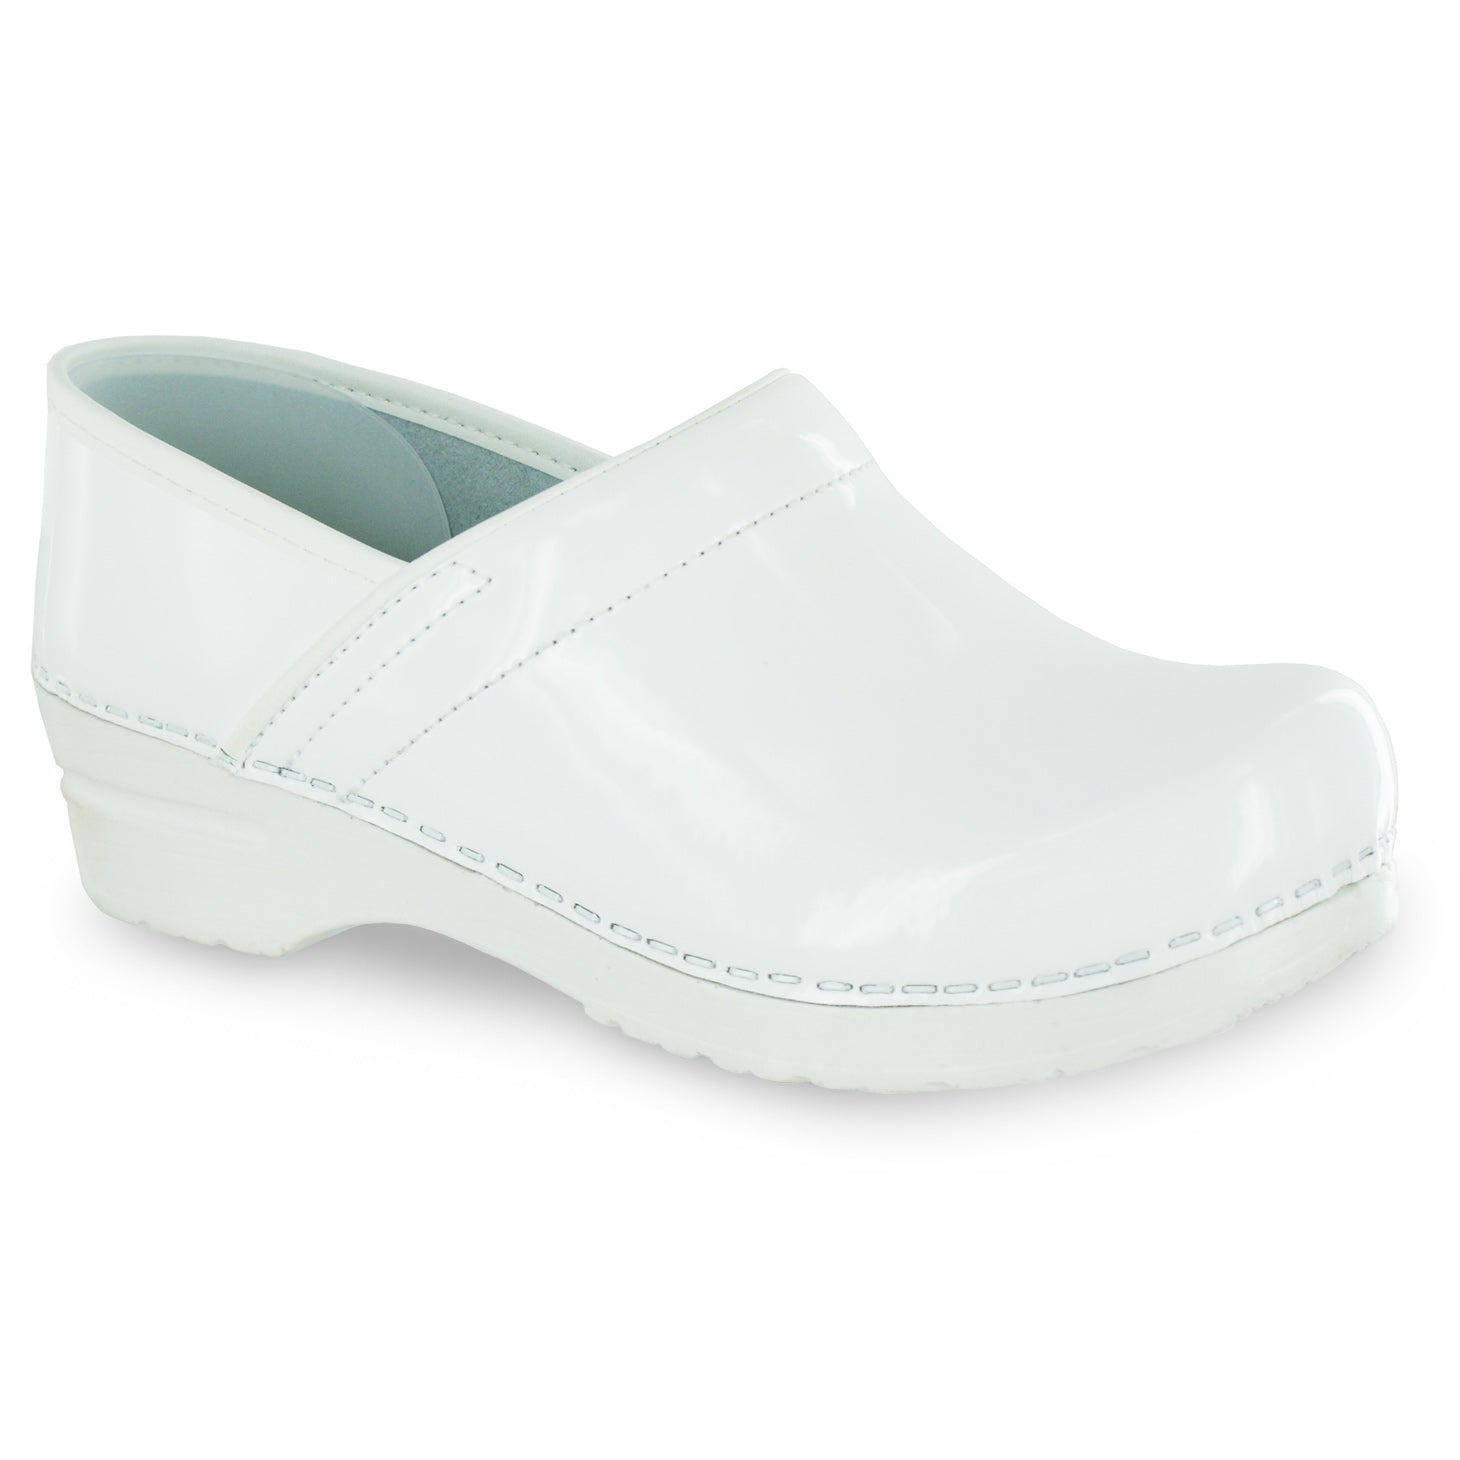 Sanita Pro. Patent Women's in White - avail Fall '22 Closed Back Clog